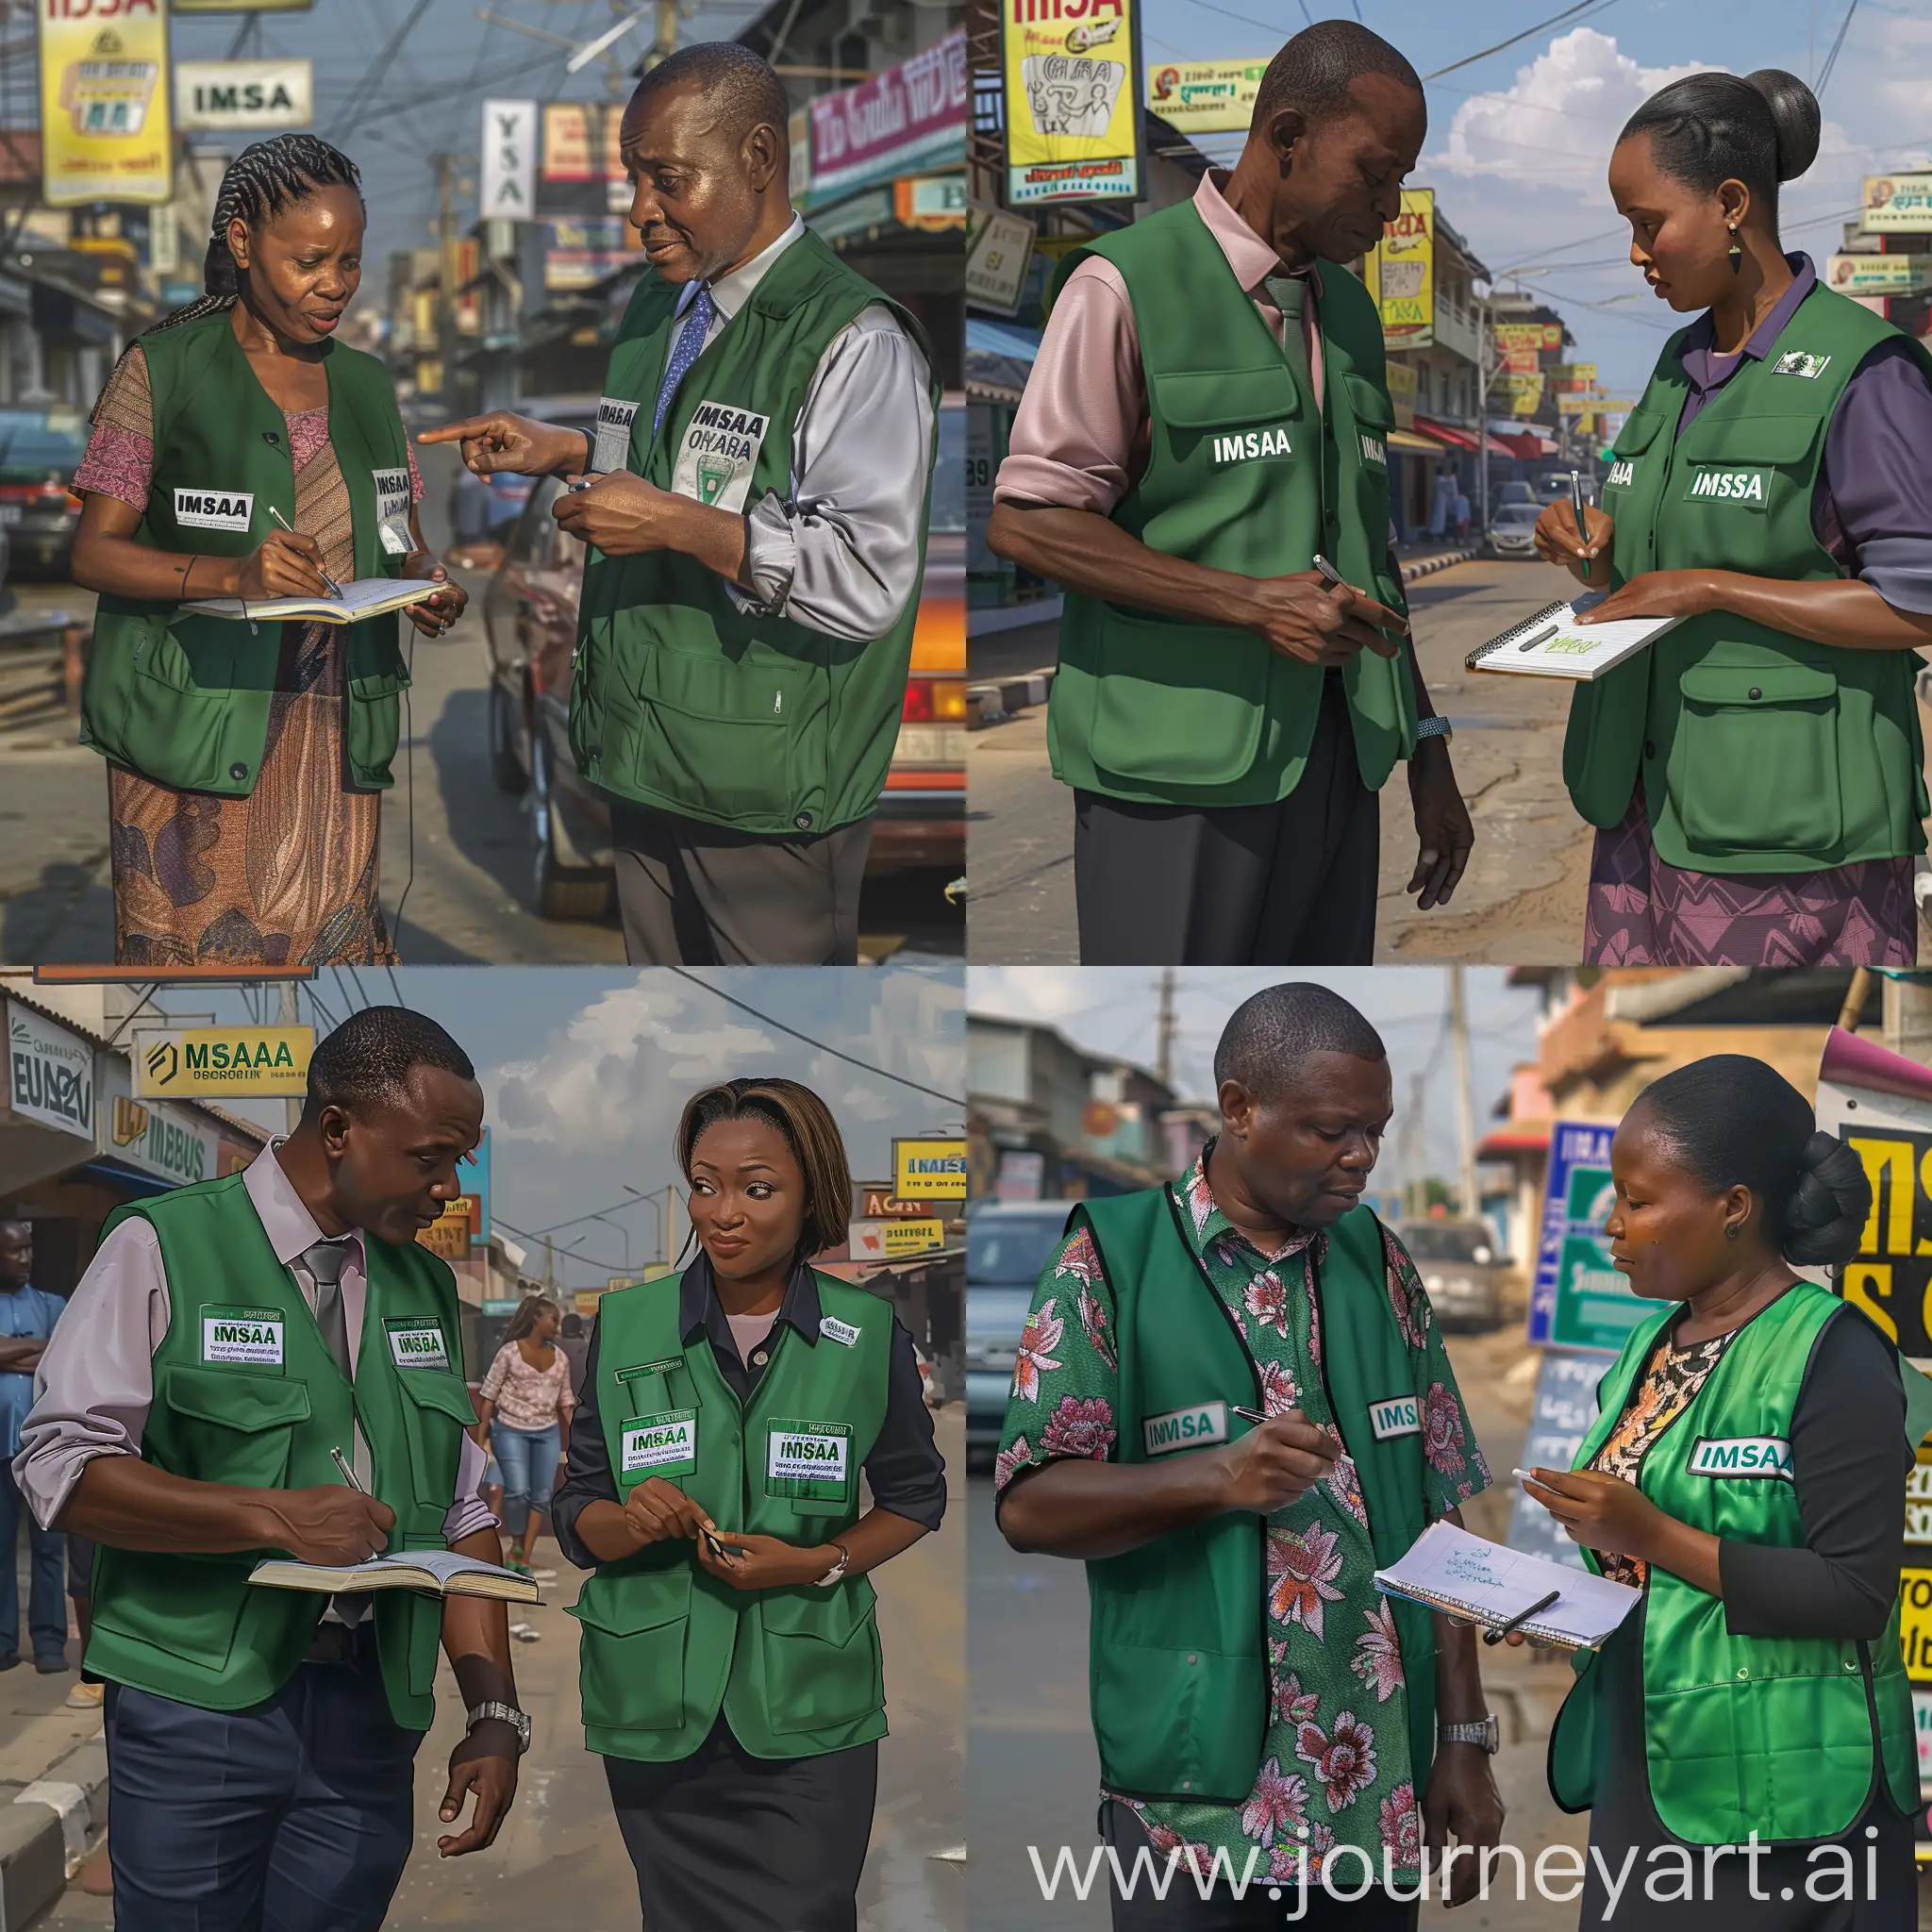 Create a photorealistic image of a Nigerian man and woman, professionally dressed but also wearing deep green plain identification vests on top of their clothes, standing on a street in Owerri Nigeria and counting business signage. Each green plain identification vest has IMSAA written on the front in small white letters. The woman is writing on a notebook while the man is pointing at the signage.